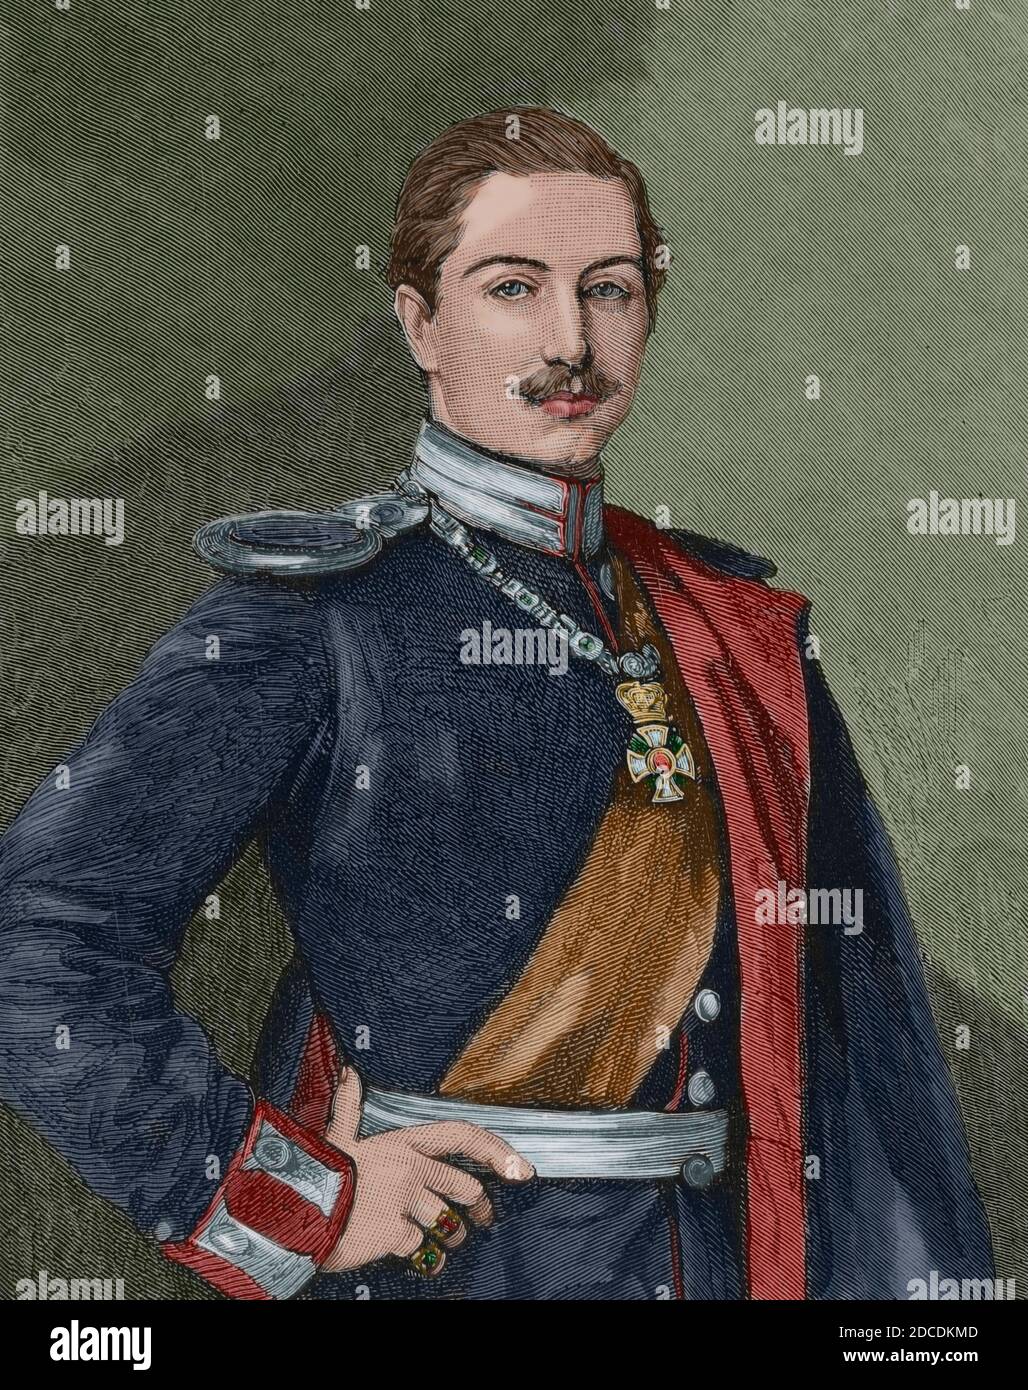 William II of Germany (1859-1941). Last Emperor or Kaiser of the German Empire and the last King of Prussia (1888-1918). Portrait while still a prince. Engraving. La Ilustracion Española y Americana, 1881. Later colouration. Stock Photo